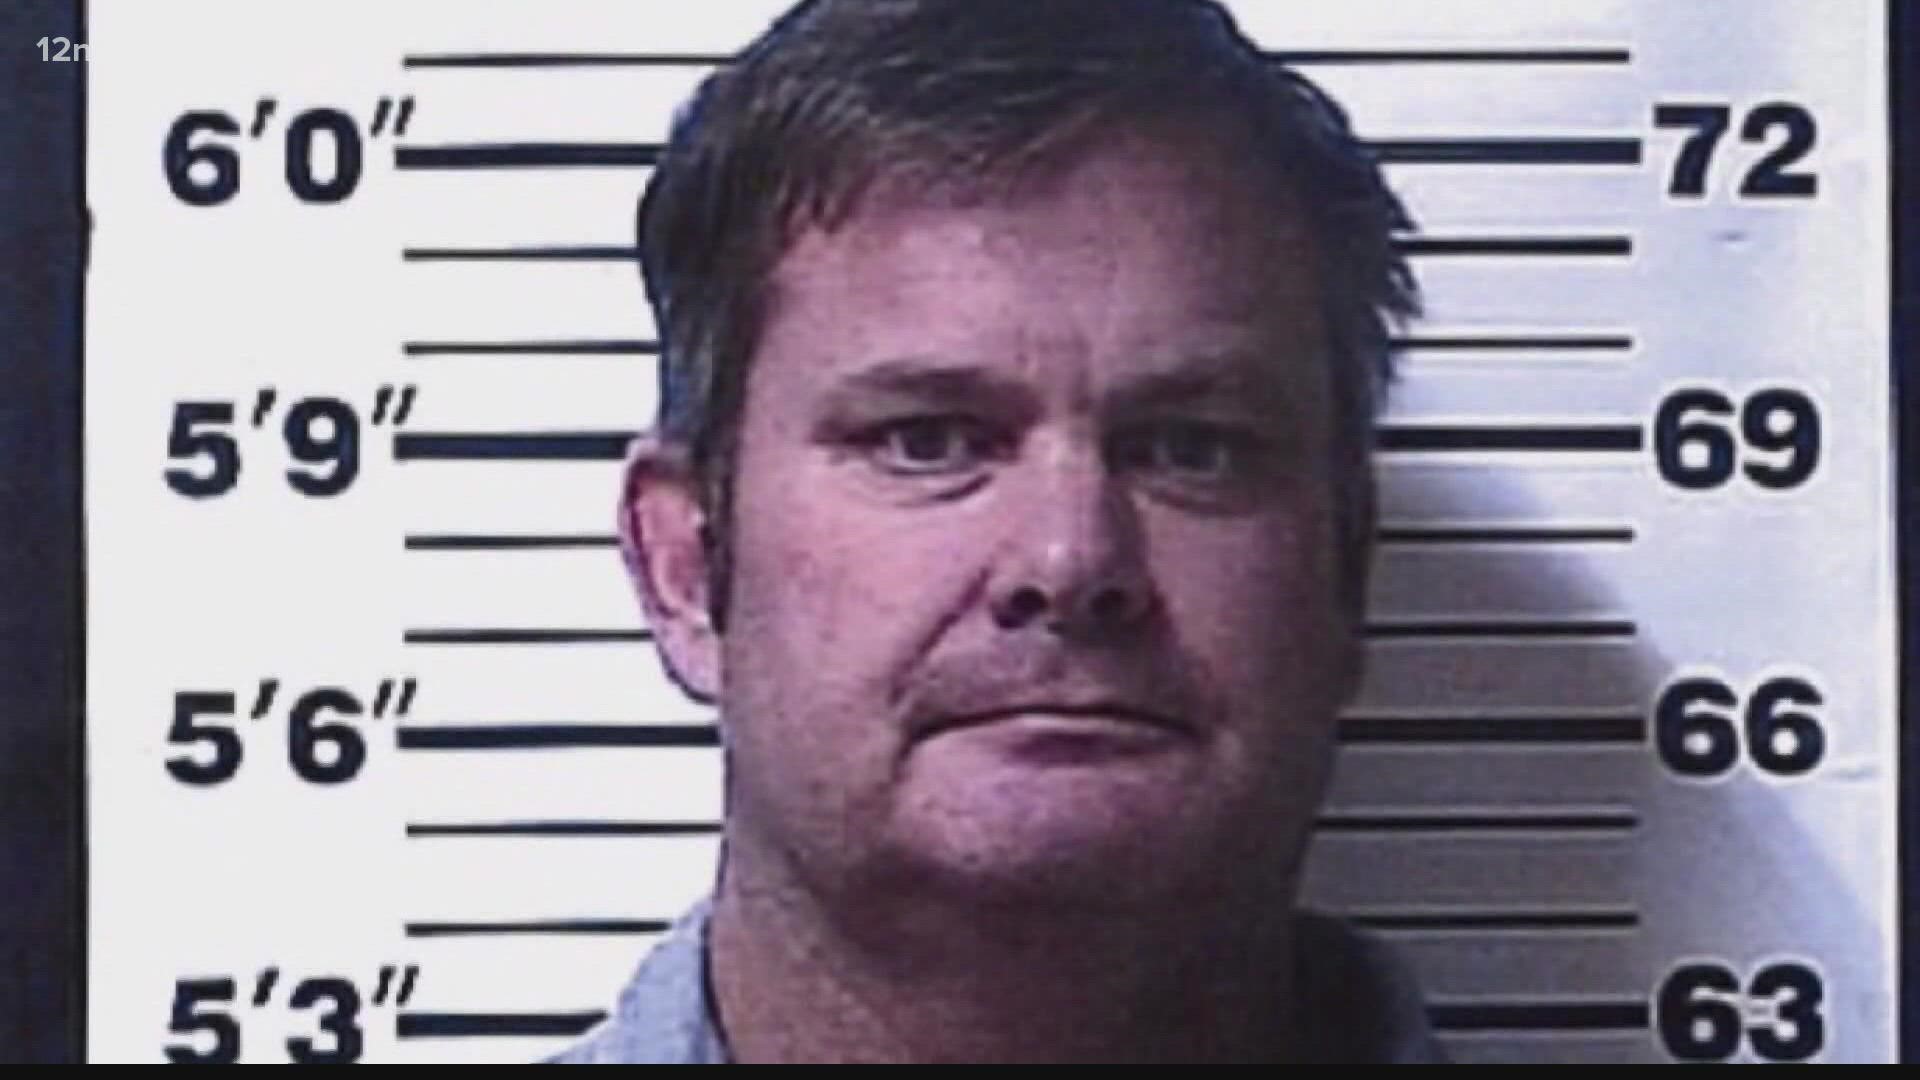 New evidence from the Chandler Police Department indicates that Chad Daybell called a Chandler funeral home in the hours following Charles Vallow's death.